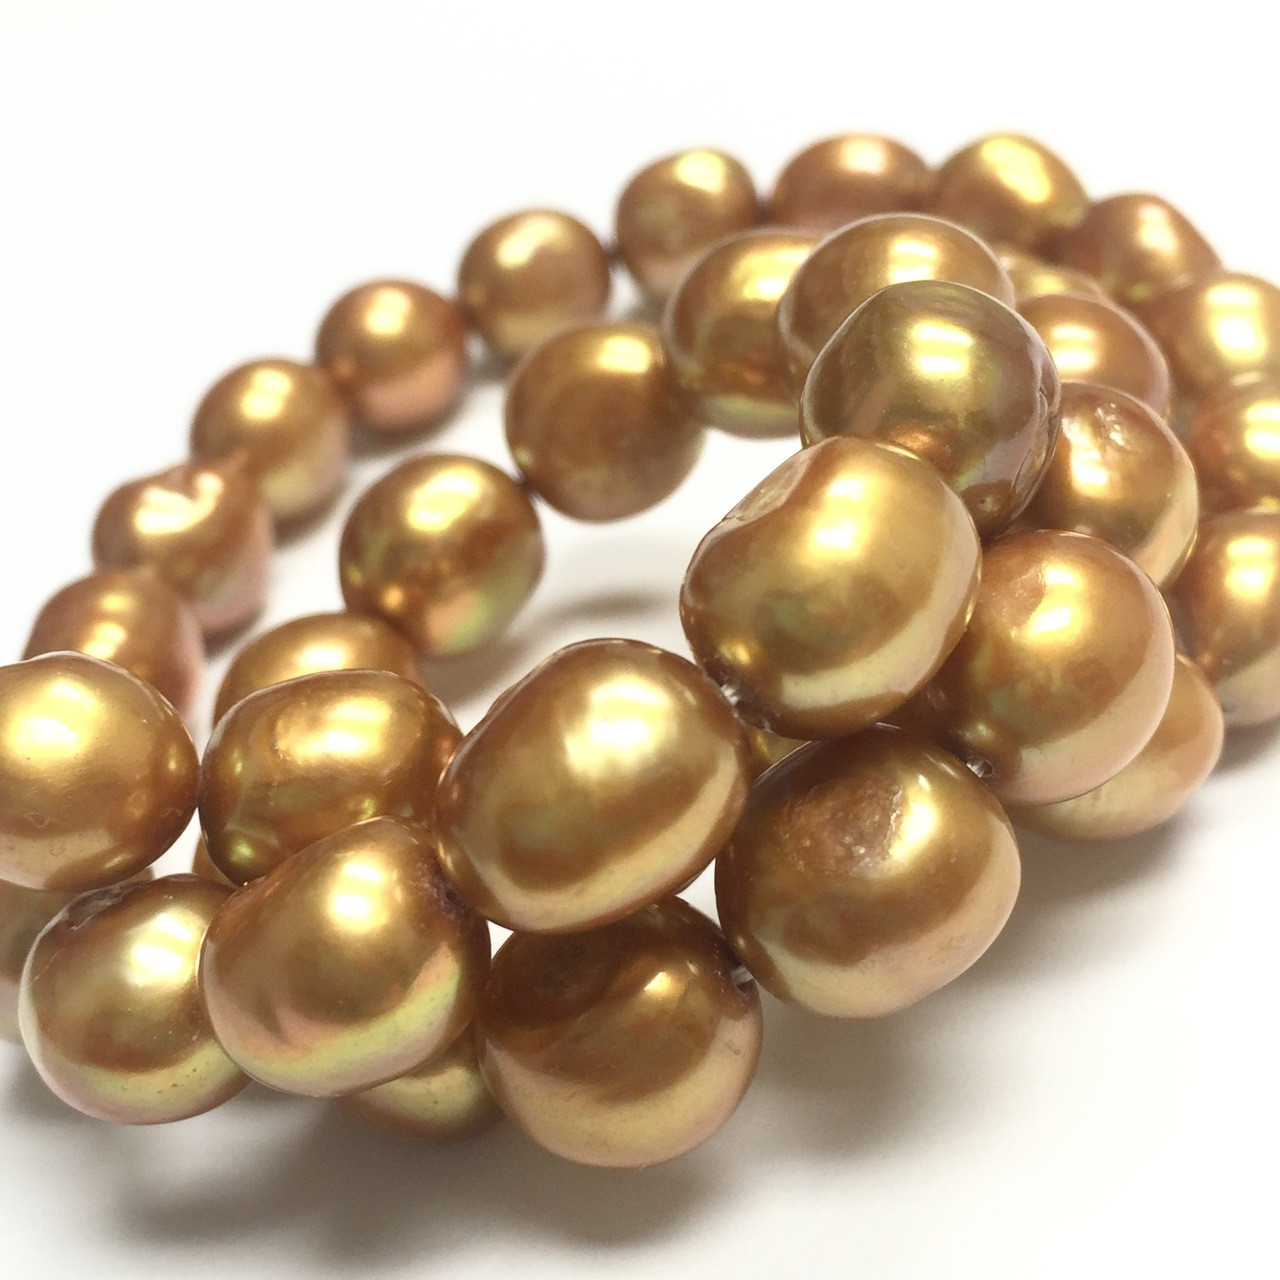 Golden Nugget Freshwater Pearl Beads - 10-11mm - A Grain of Sand